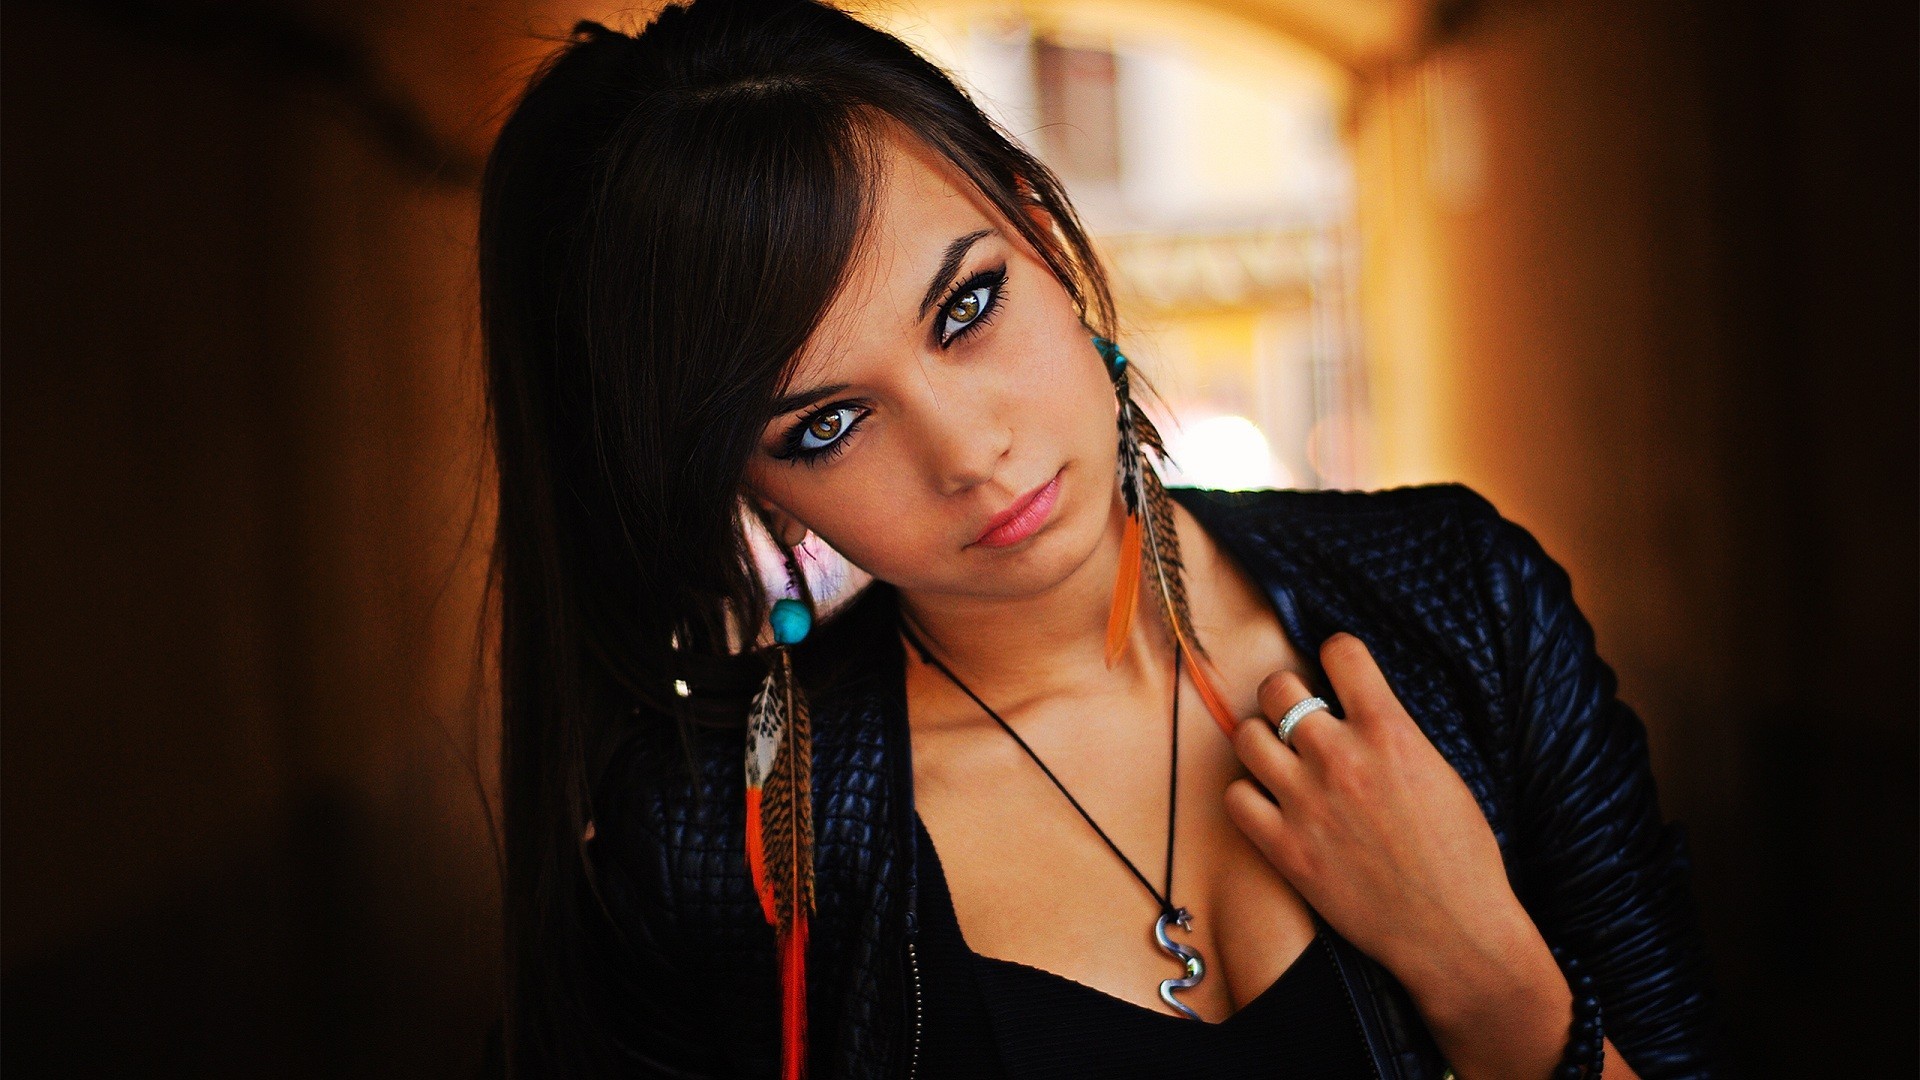 People 1920x1080 feathers dark hair black outfits women hazel eyes jacket cleavage model face portrait long hair looking at viewer necklace black clothing leather jacket tunnel rings smoky eyes makeup black hair